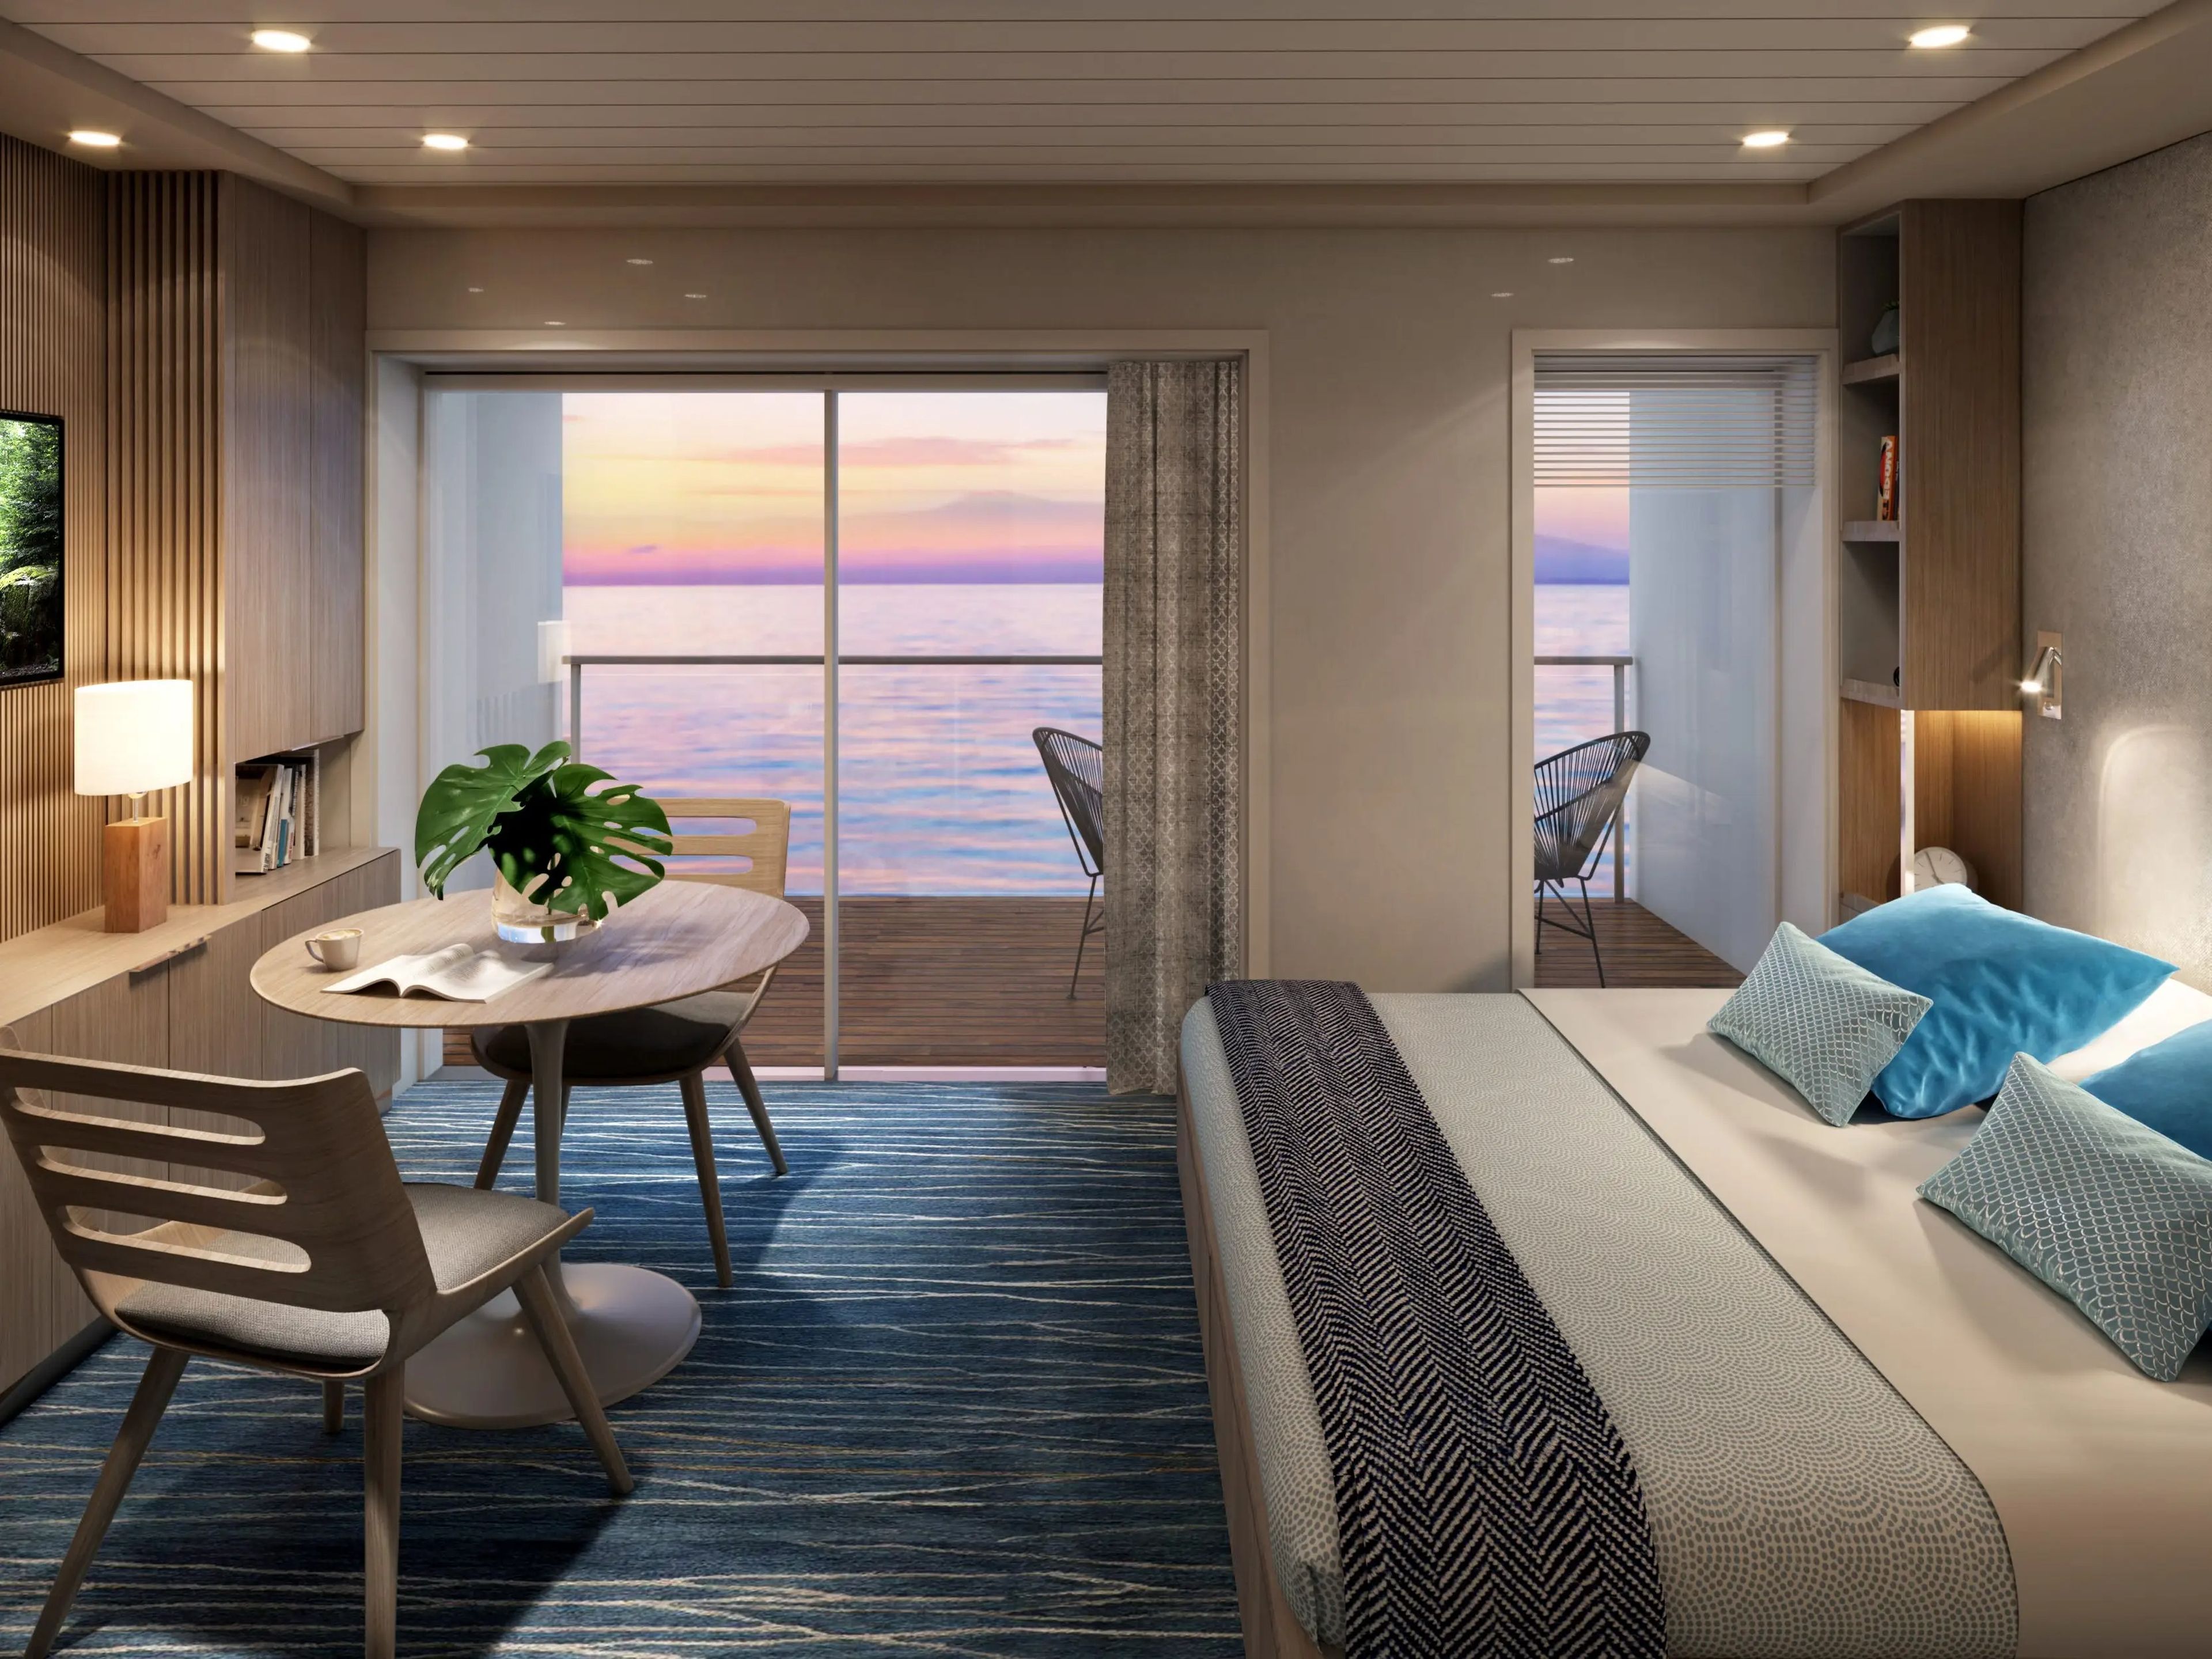 A rendering of a residential cruise ship cabin with a made bed and a sunset in the background.